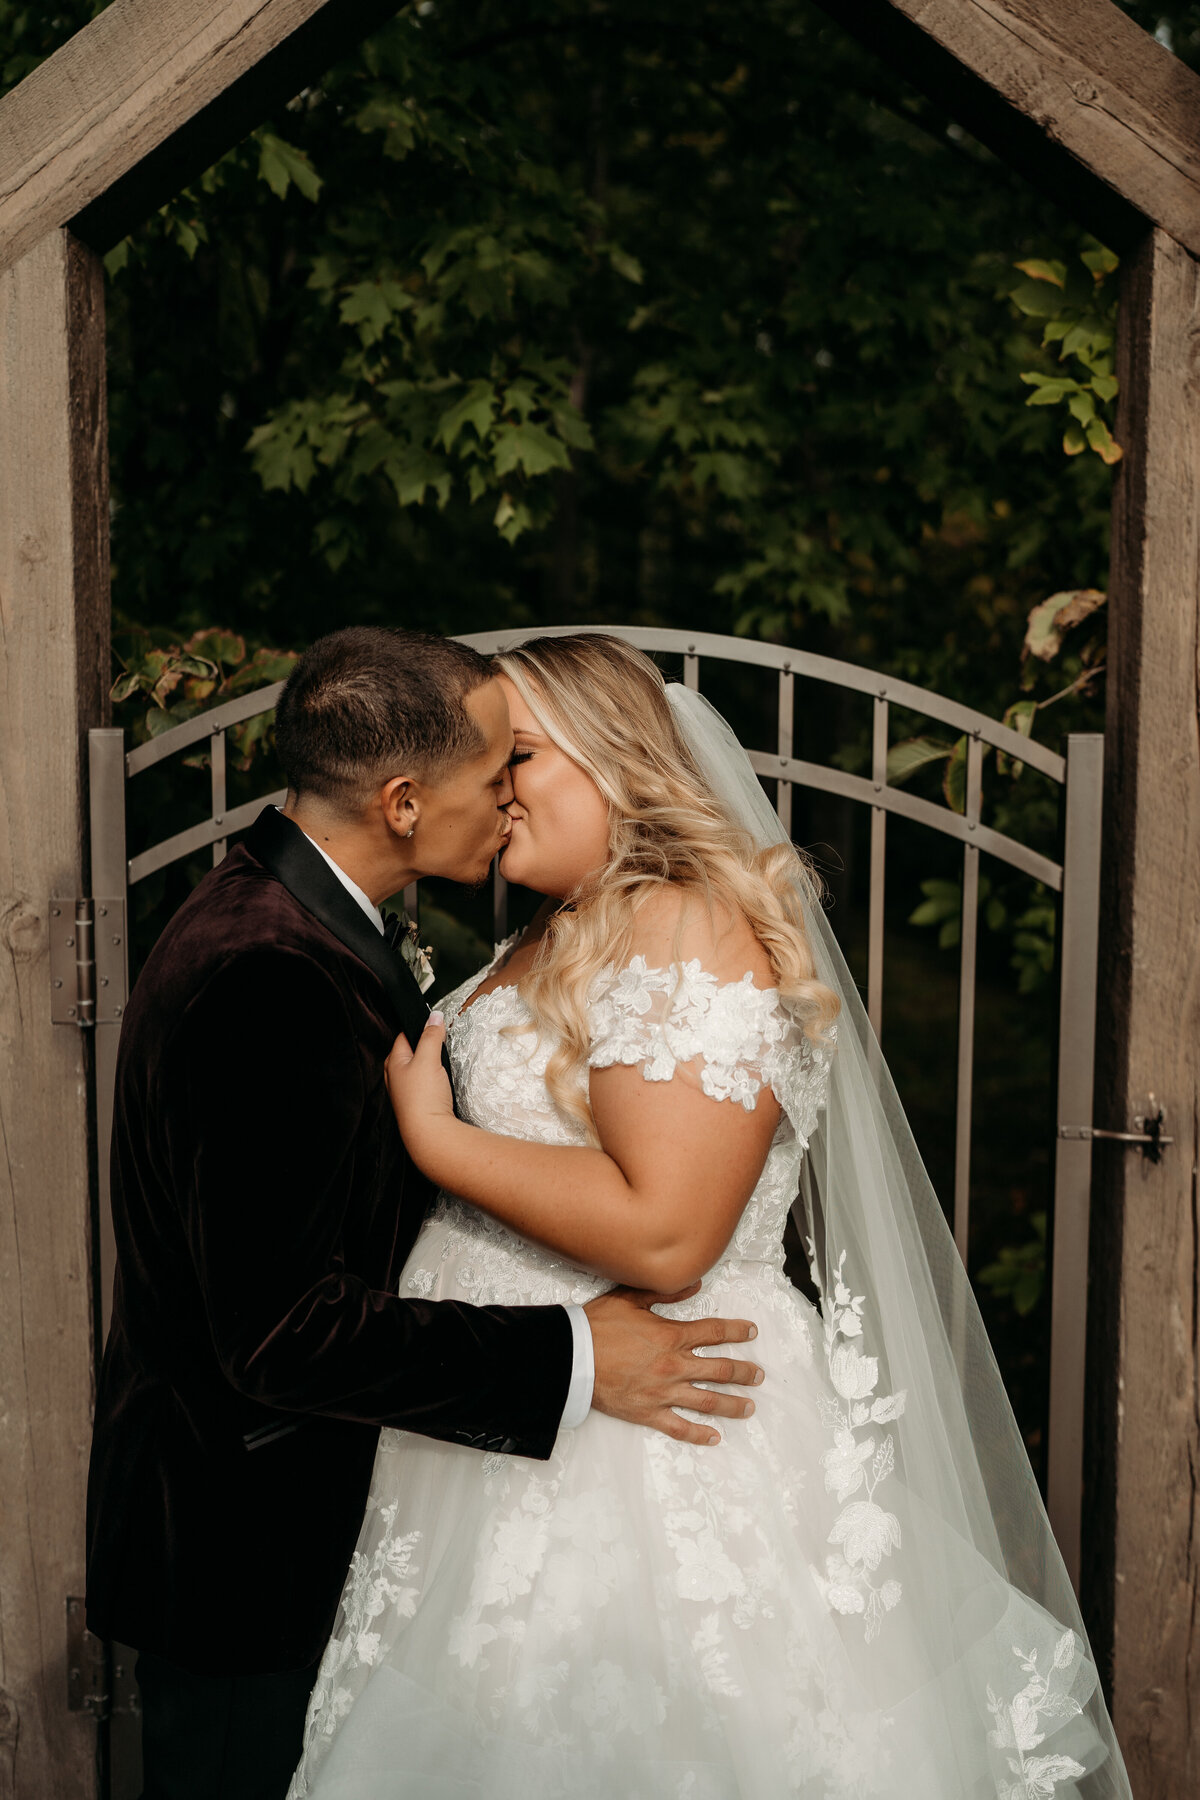 Beyond the Pines Photography Midwest Wedding